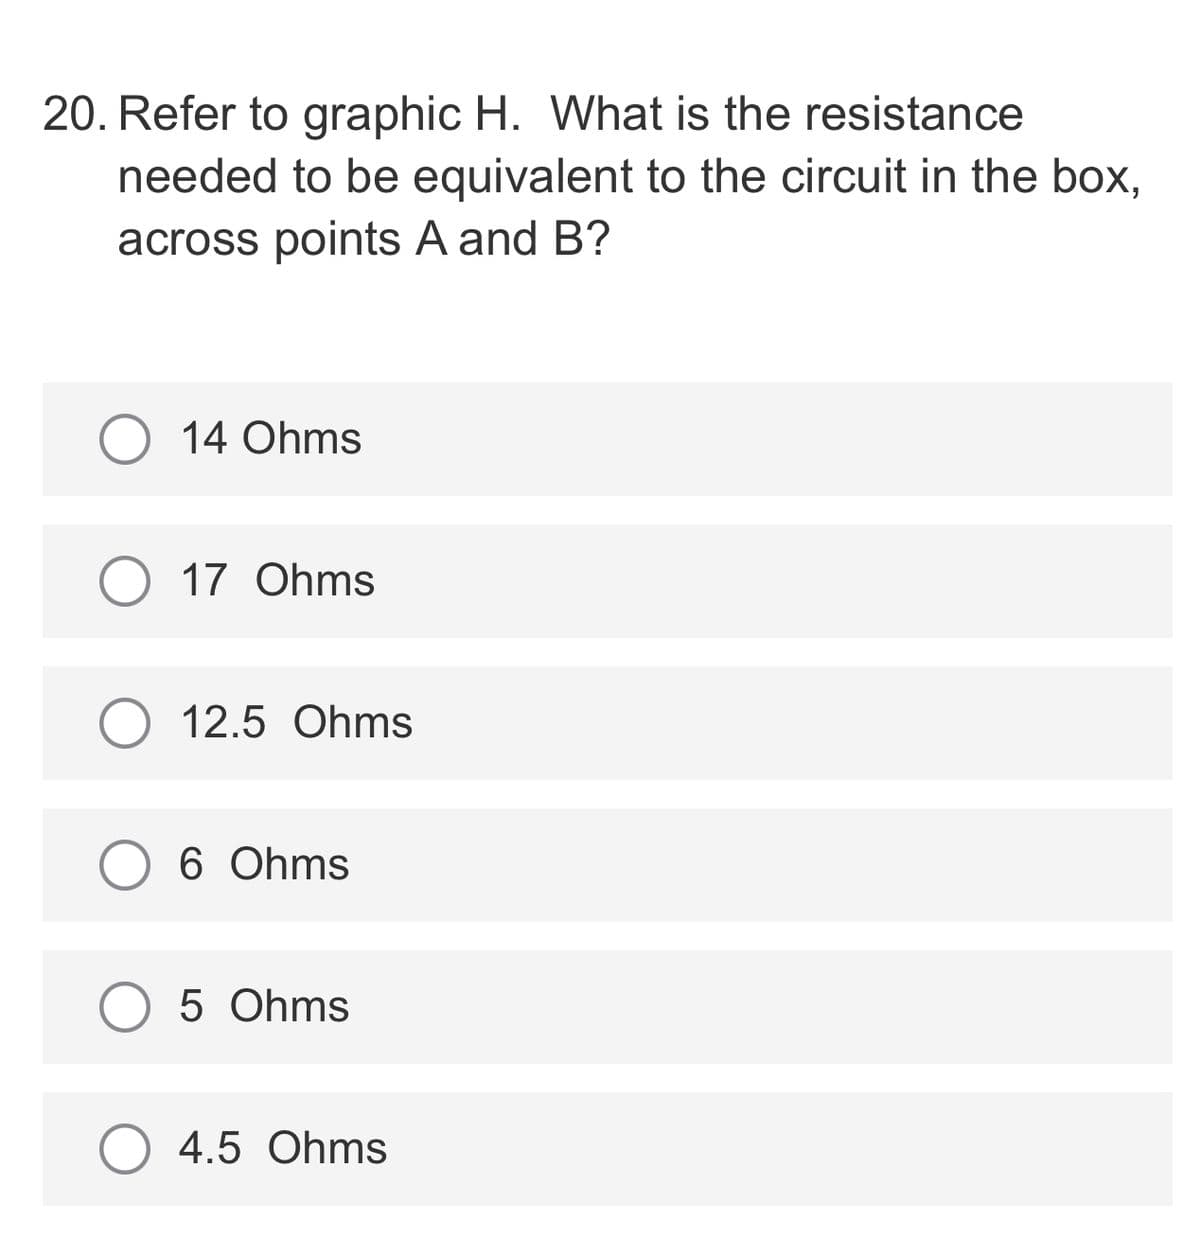 20. Refer to graphic H. What is the resistance
needed to be equivalent to the circuit in the box,
across points A and B?
O 14 Ohms
O 17 Ohms
12.5 Ohms
6 Ohms
O 5 Ohms
4.5 Ohms
